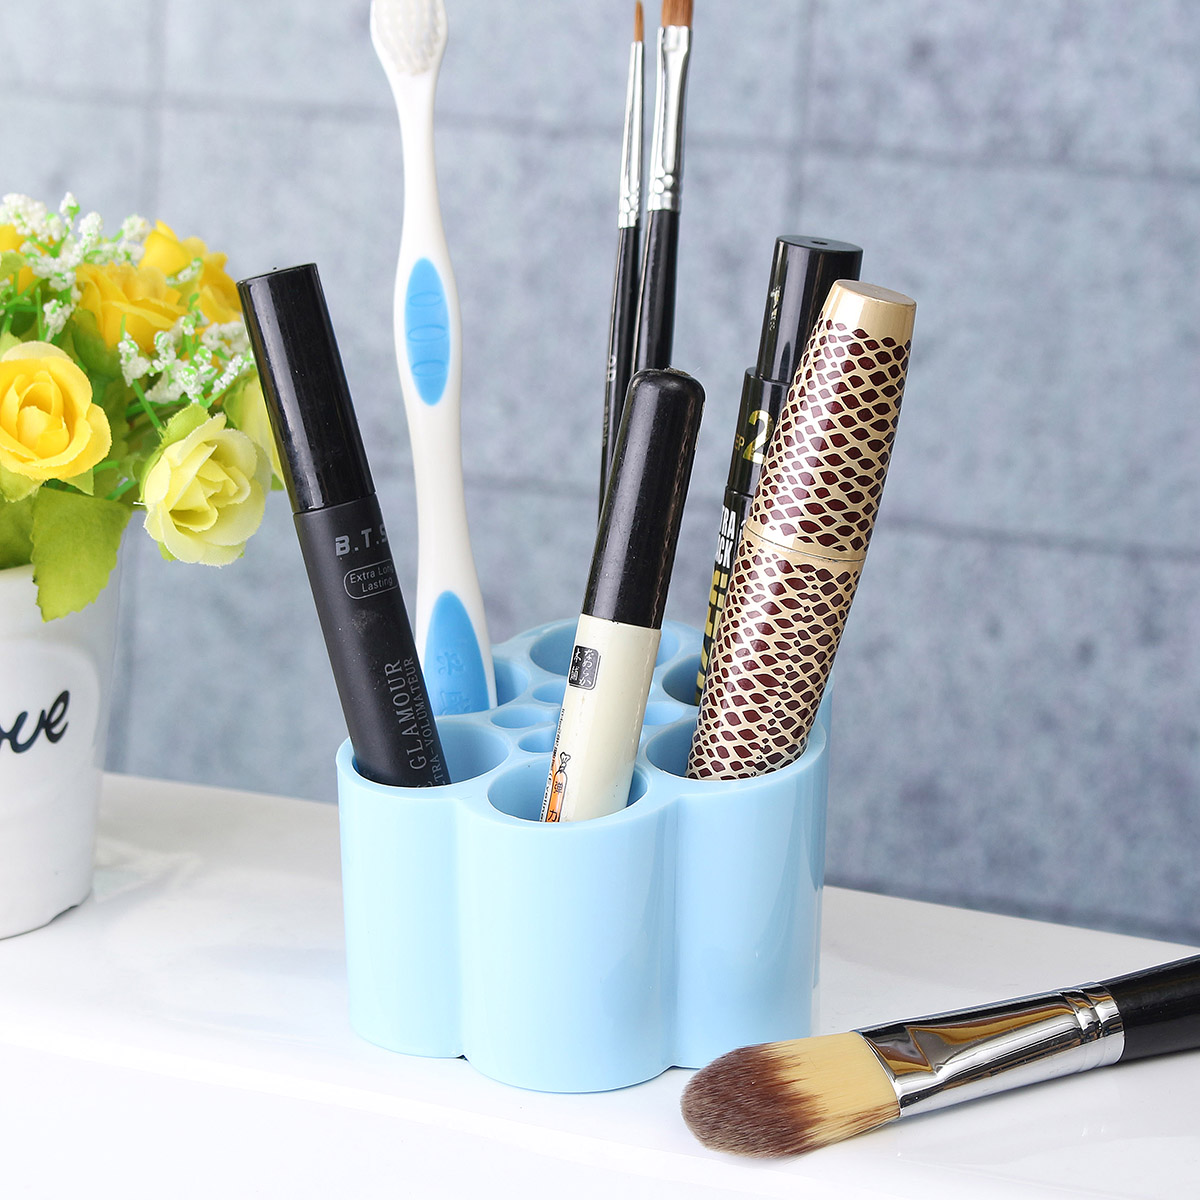 4-Colors-Brushes-Organizer-Makeup-Cosmetic-Case-Holder-Display-Stand-Storage-Box-1114728-1